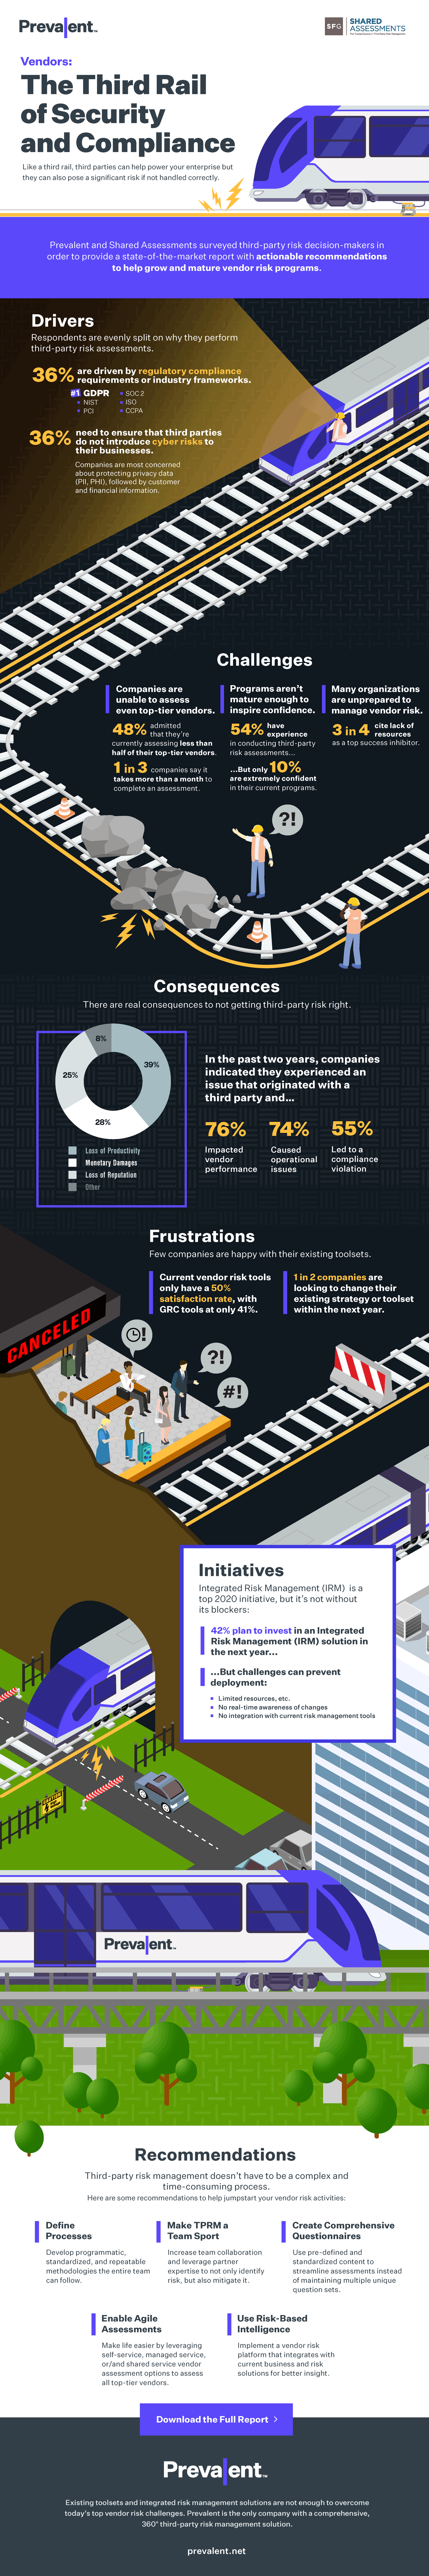 Supply Chain 3rd Party Risk Management Infographic